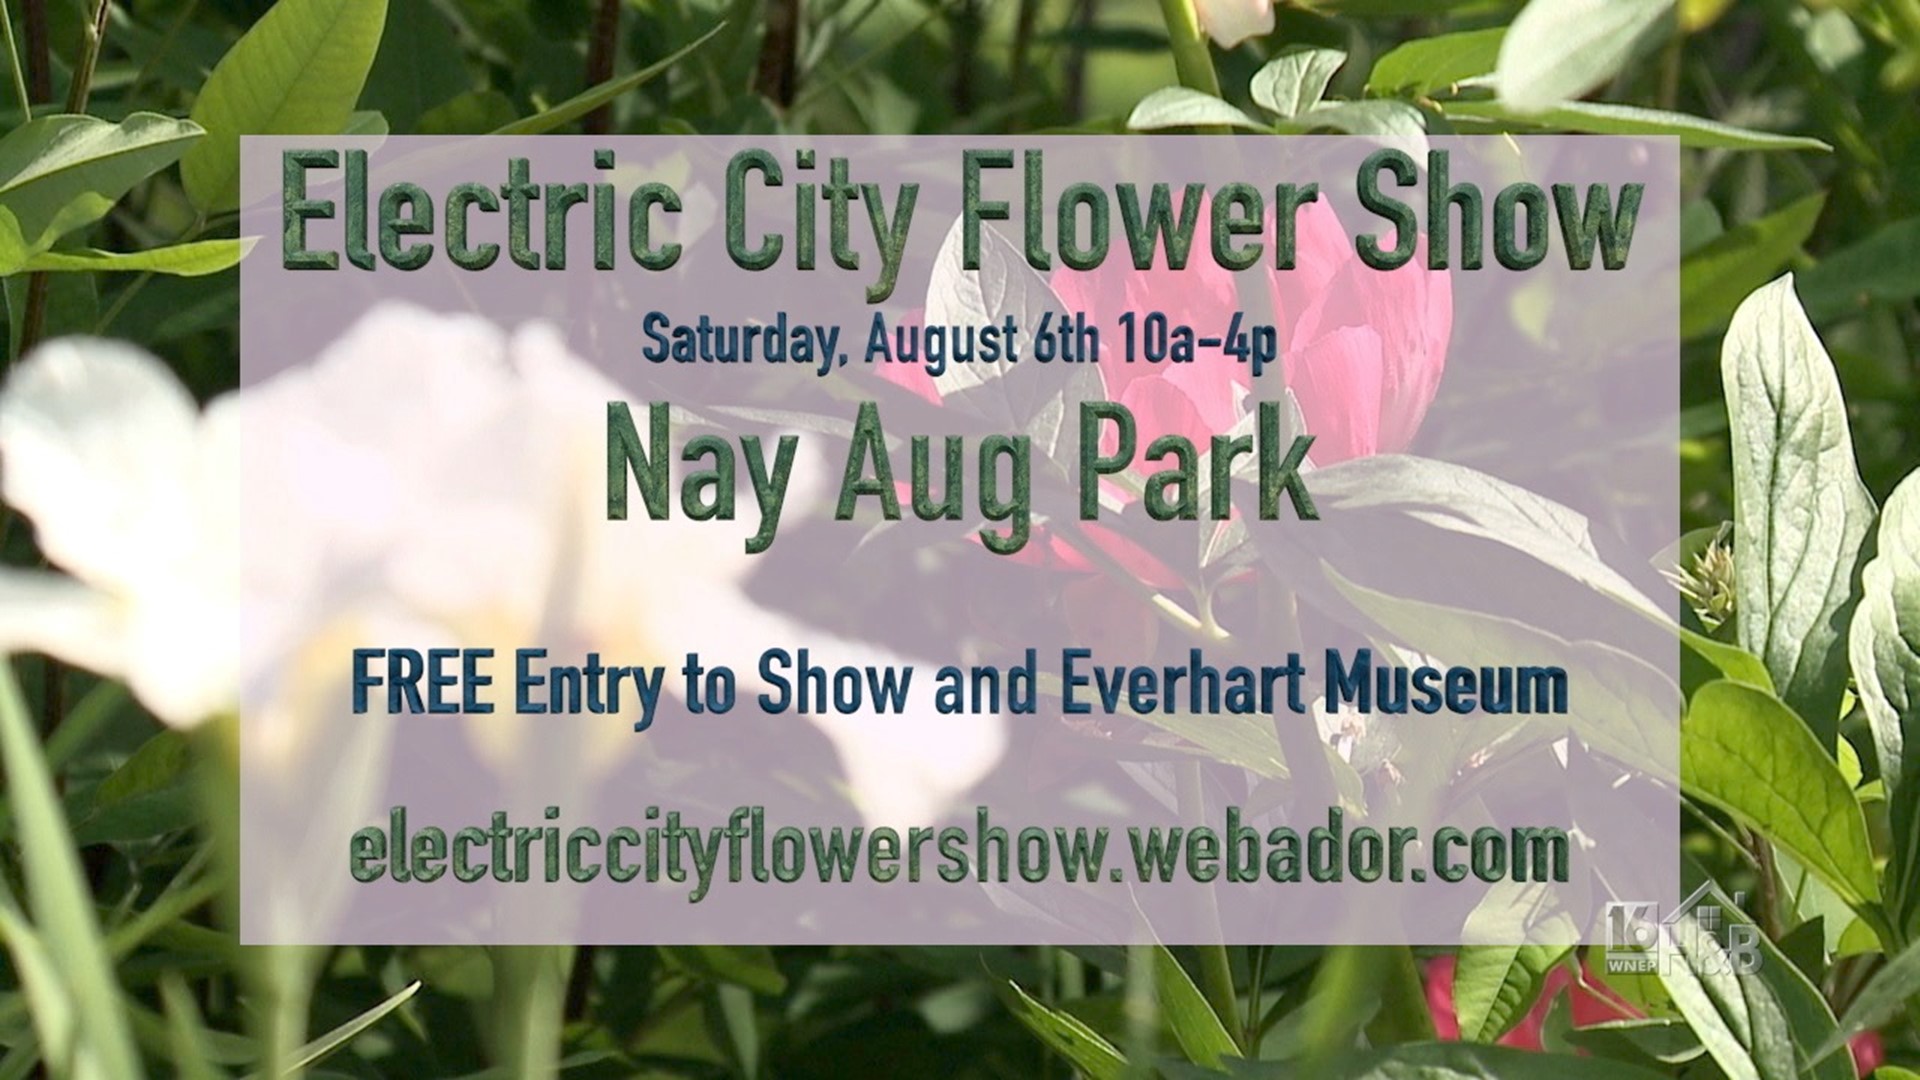 Electric City Flower Show Looking For Exhibitors And Competitors